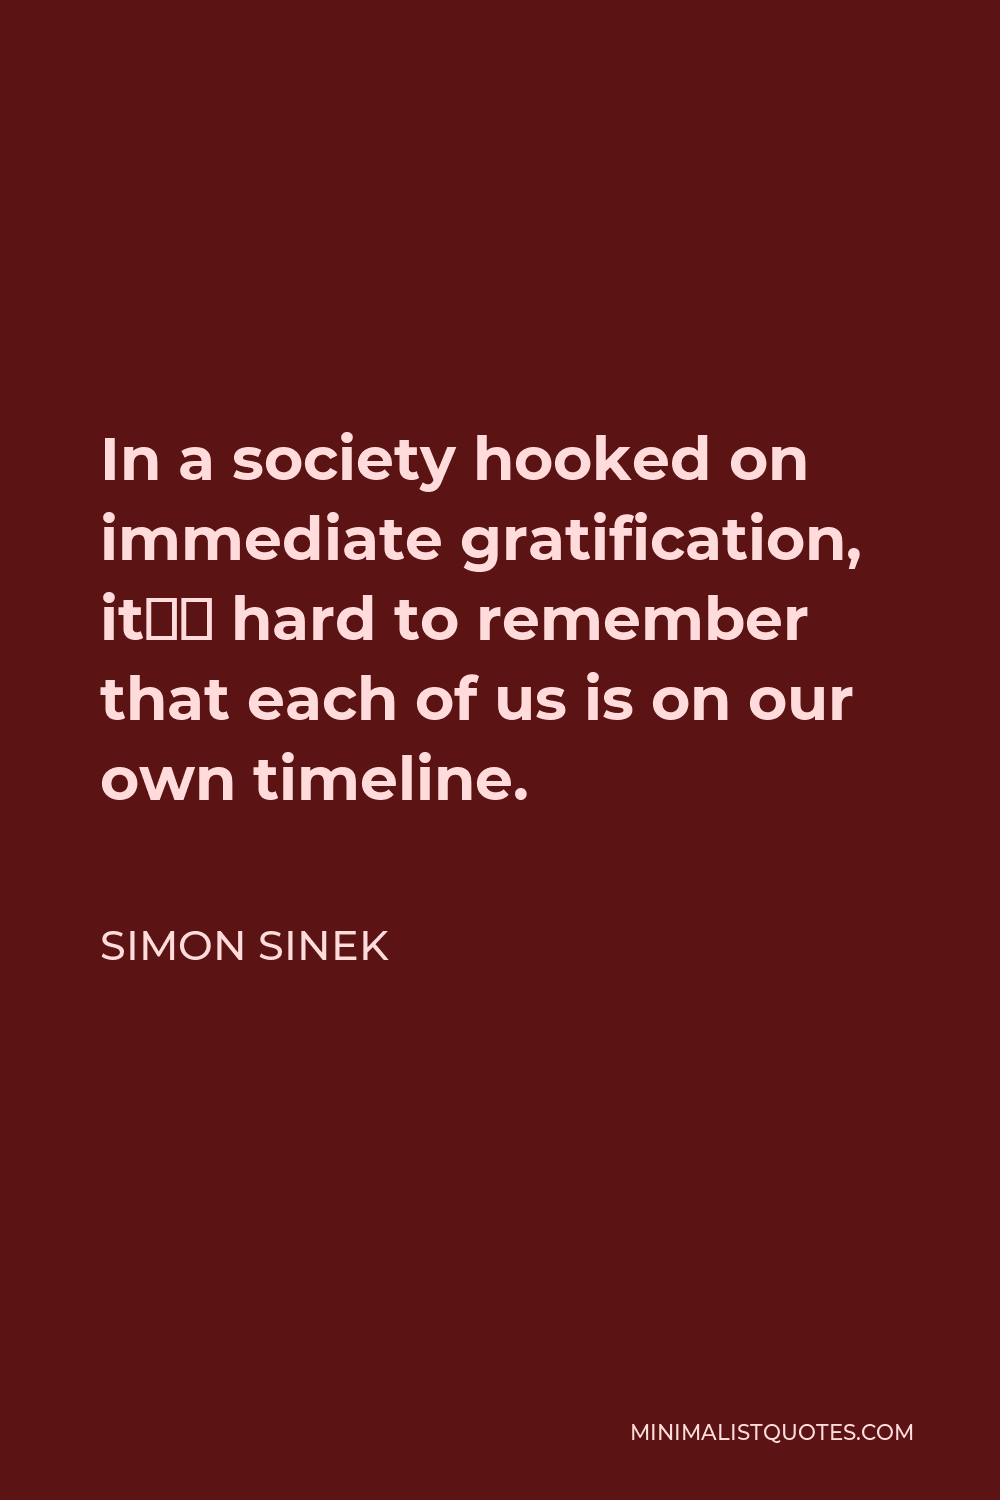 Simon Sinek Quote - In a society hooked on immediate gratification, it’s hard to remember that each of us is on our own timeline.